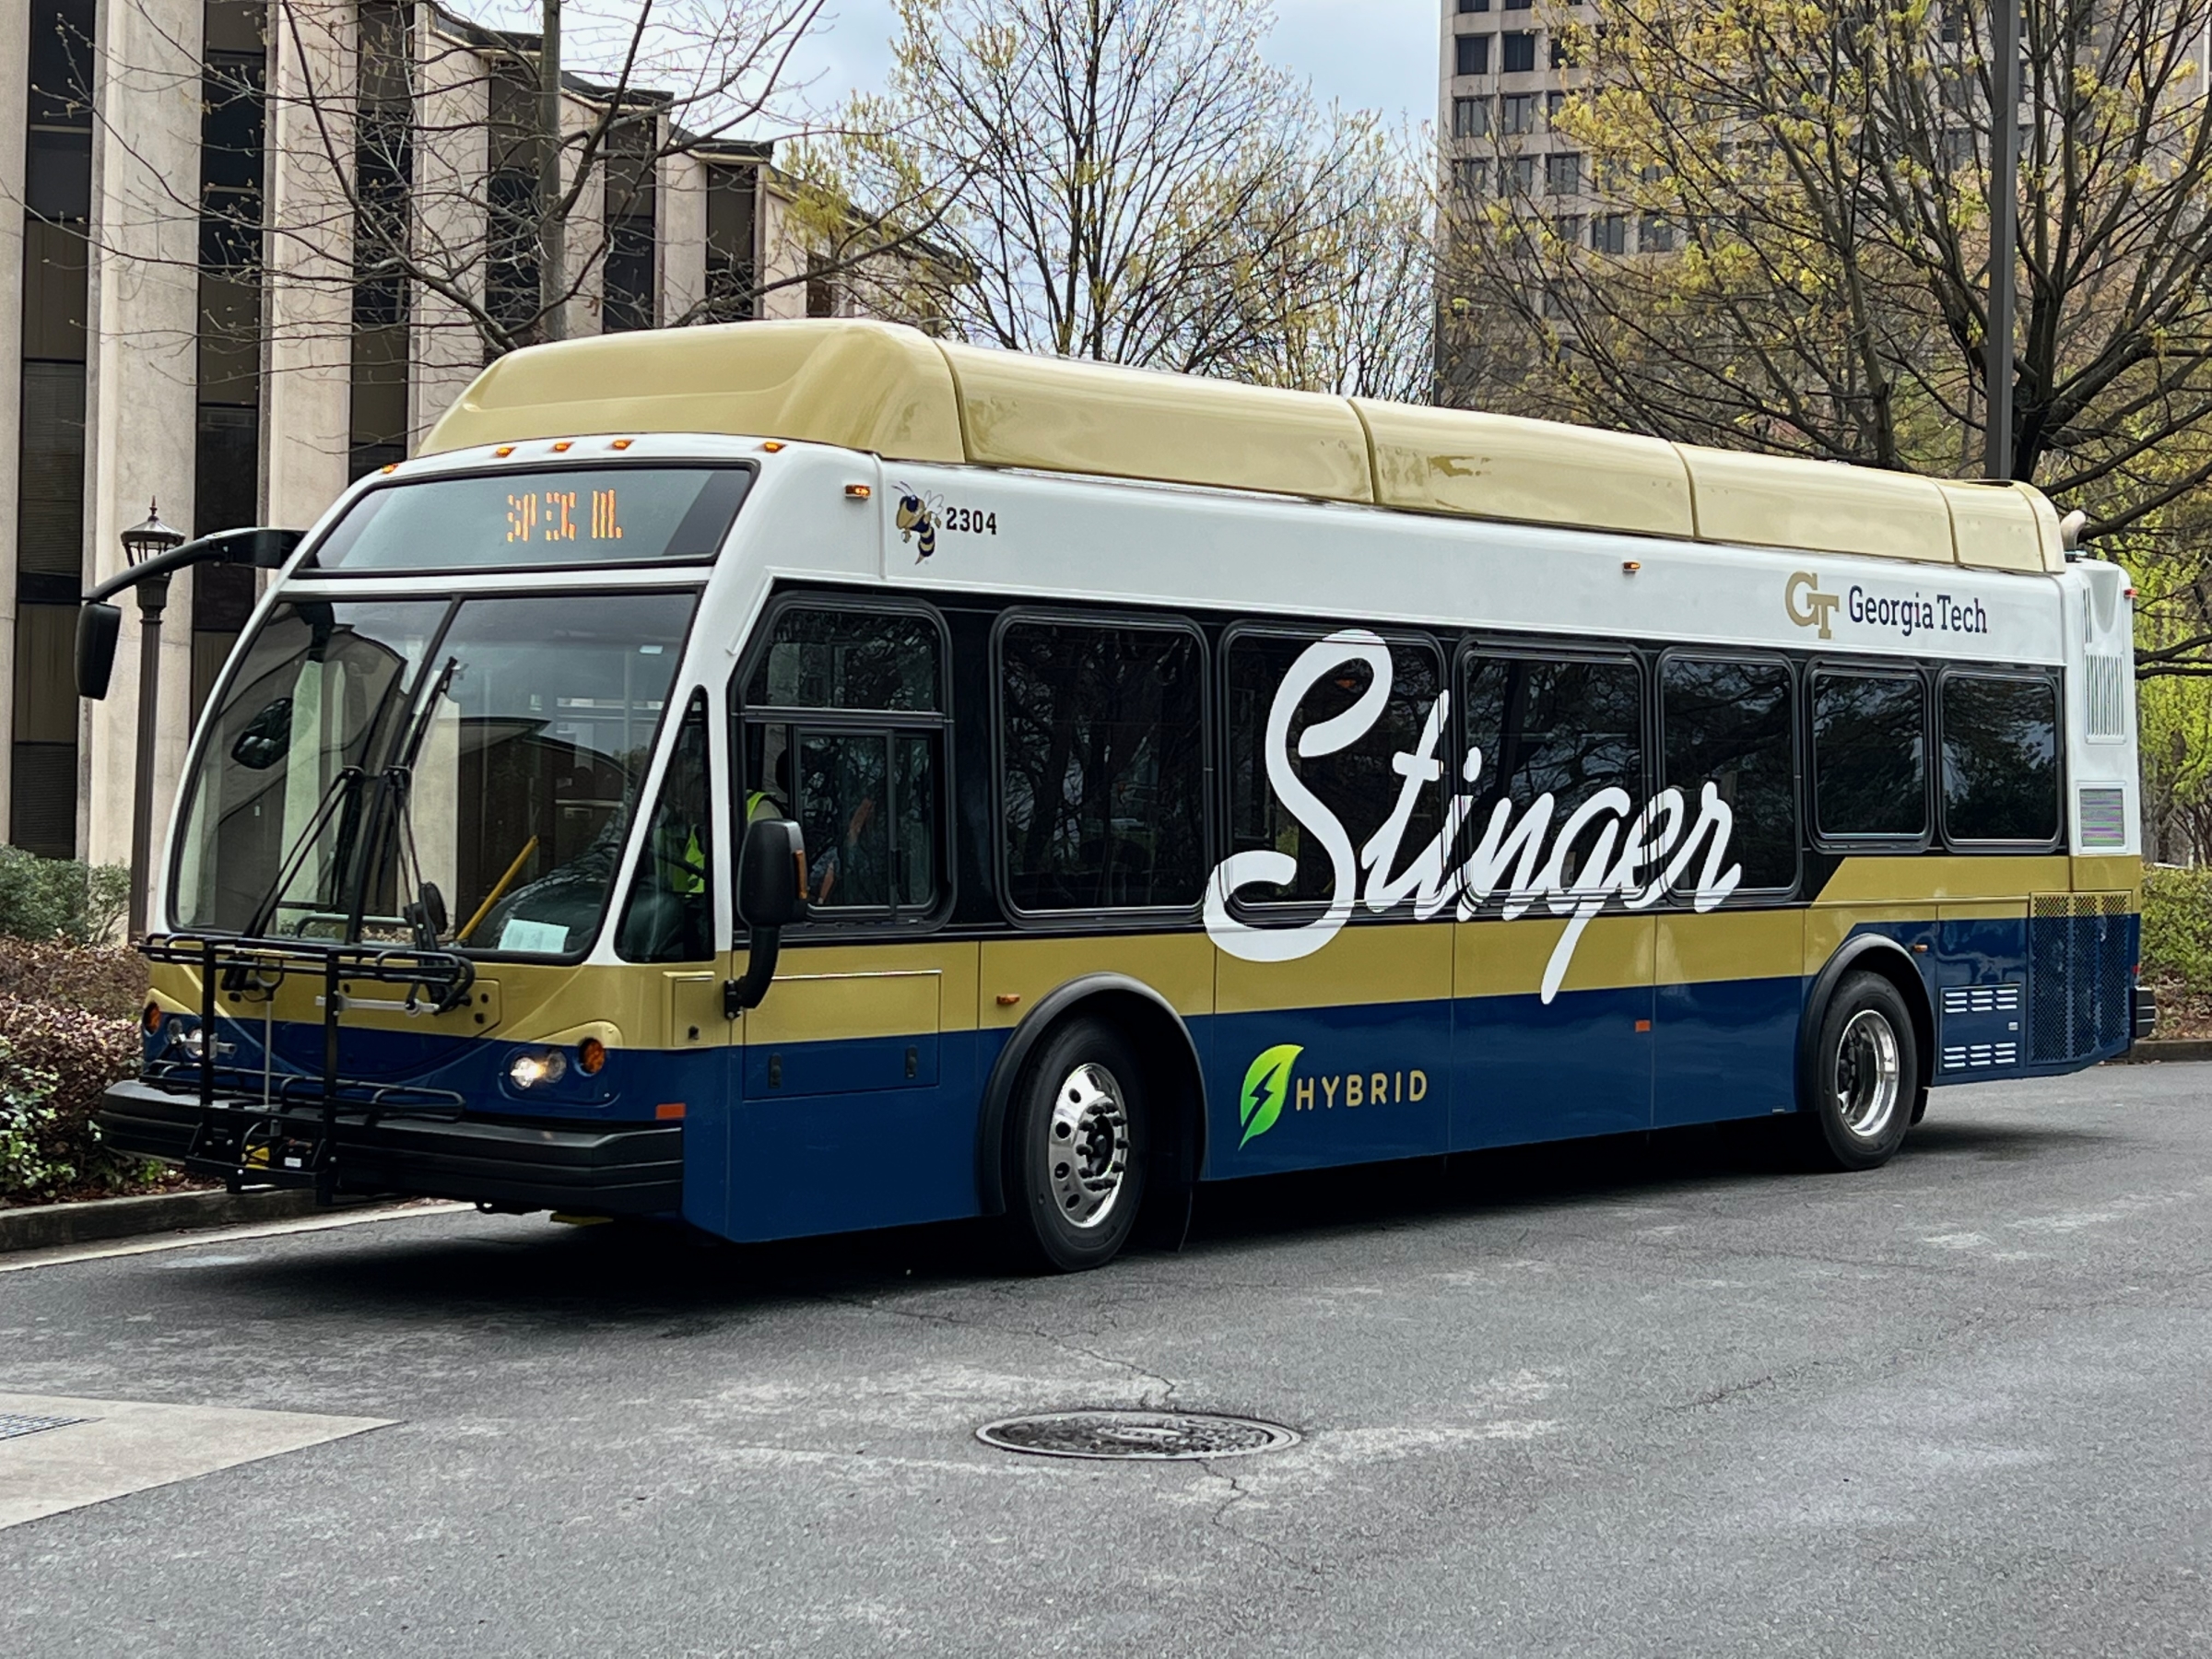 A navy and gold colored bus with the word Stinger